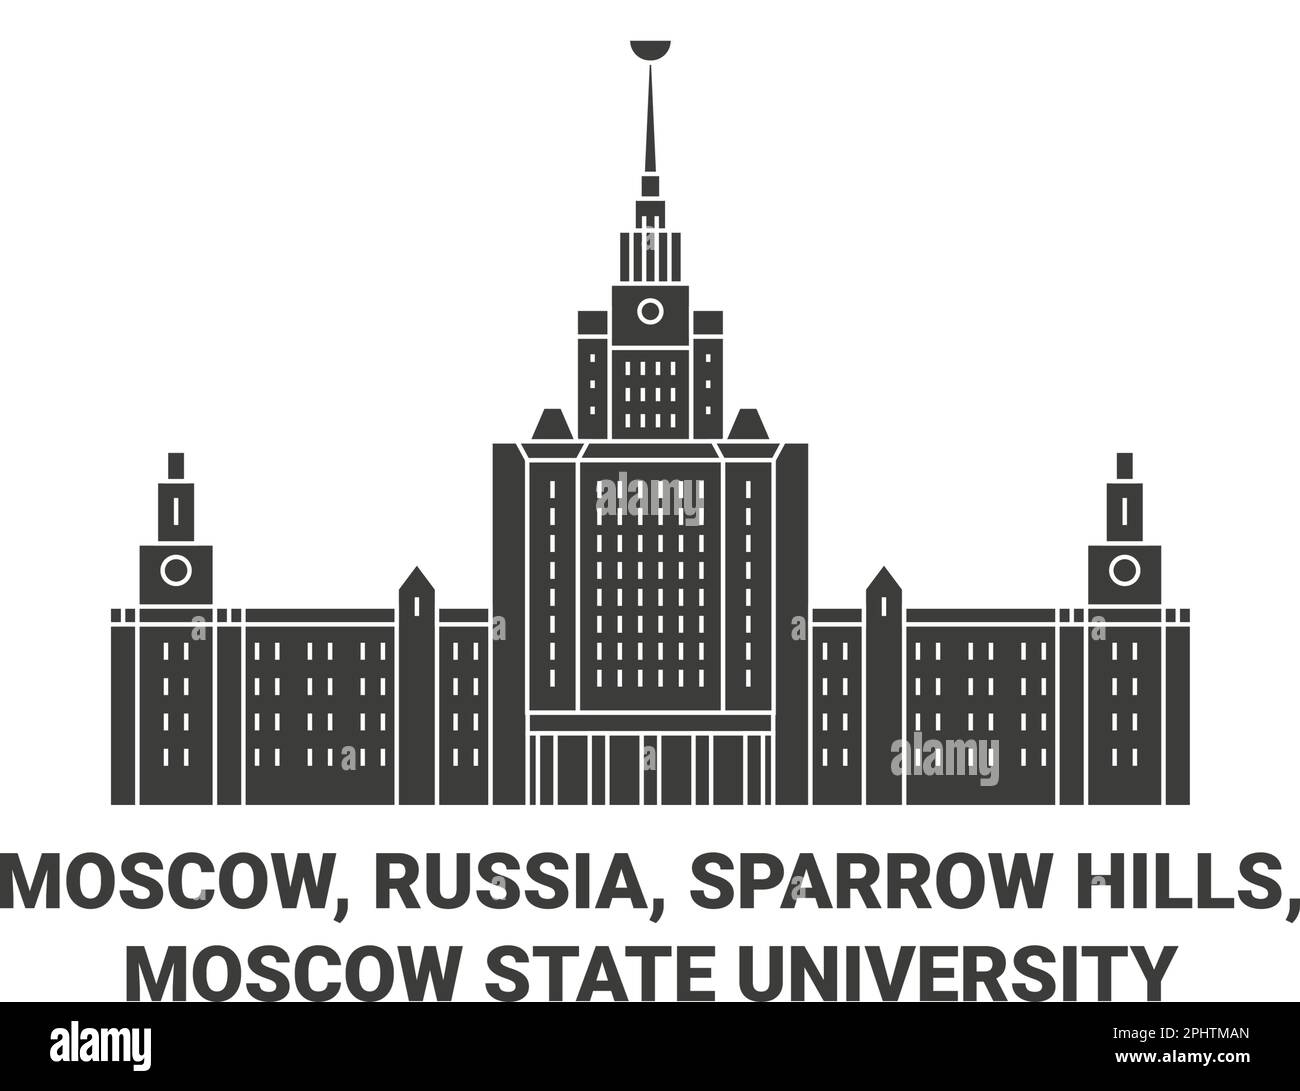 Russia, Moscow, Sparrow Hills, Moscow State University travel landmark vector illustration Stock Vector